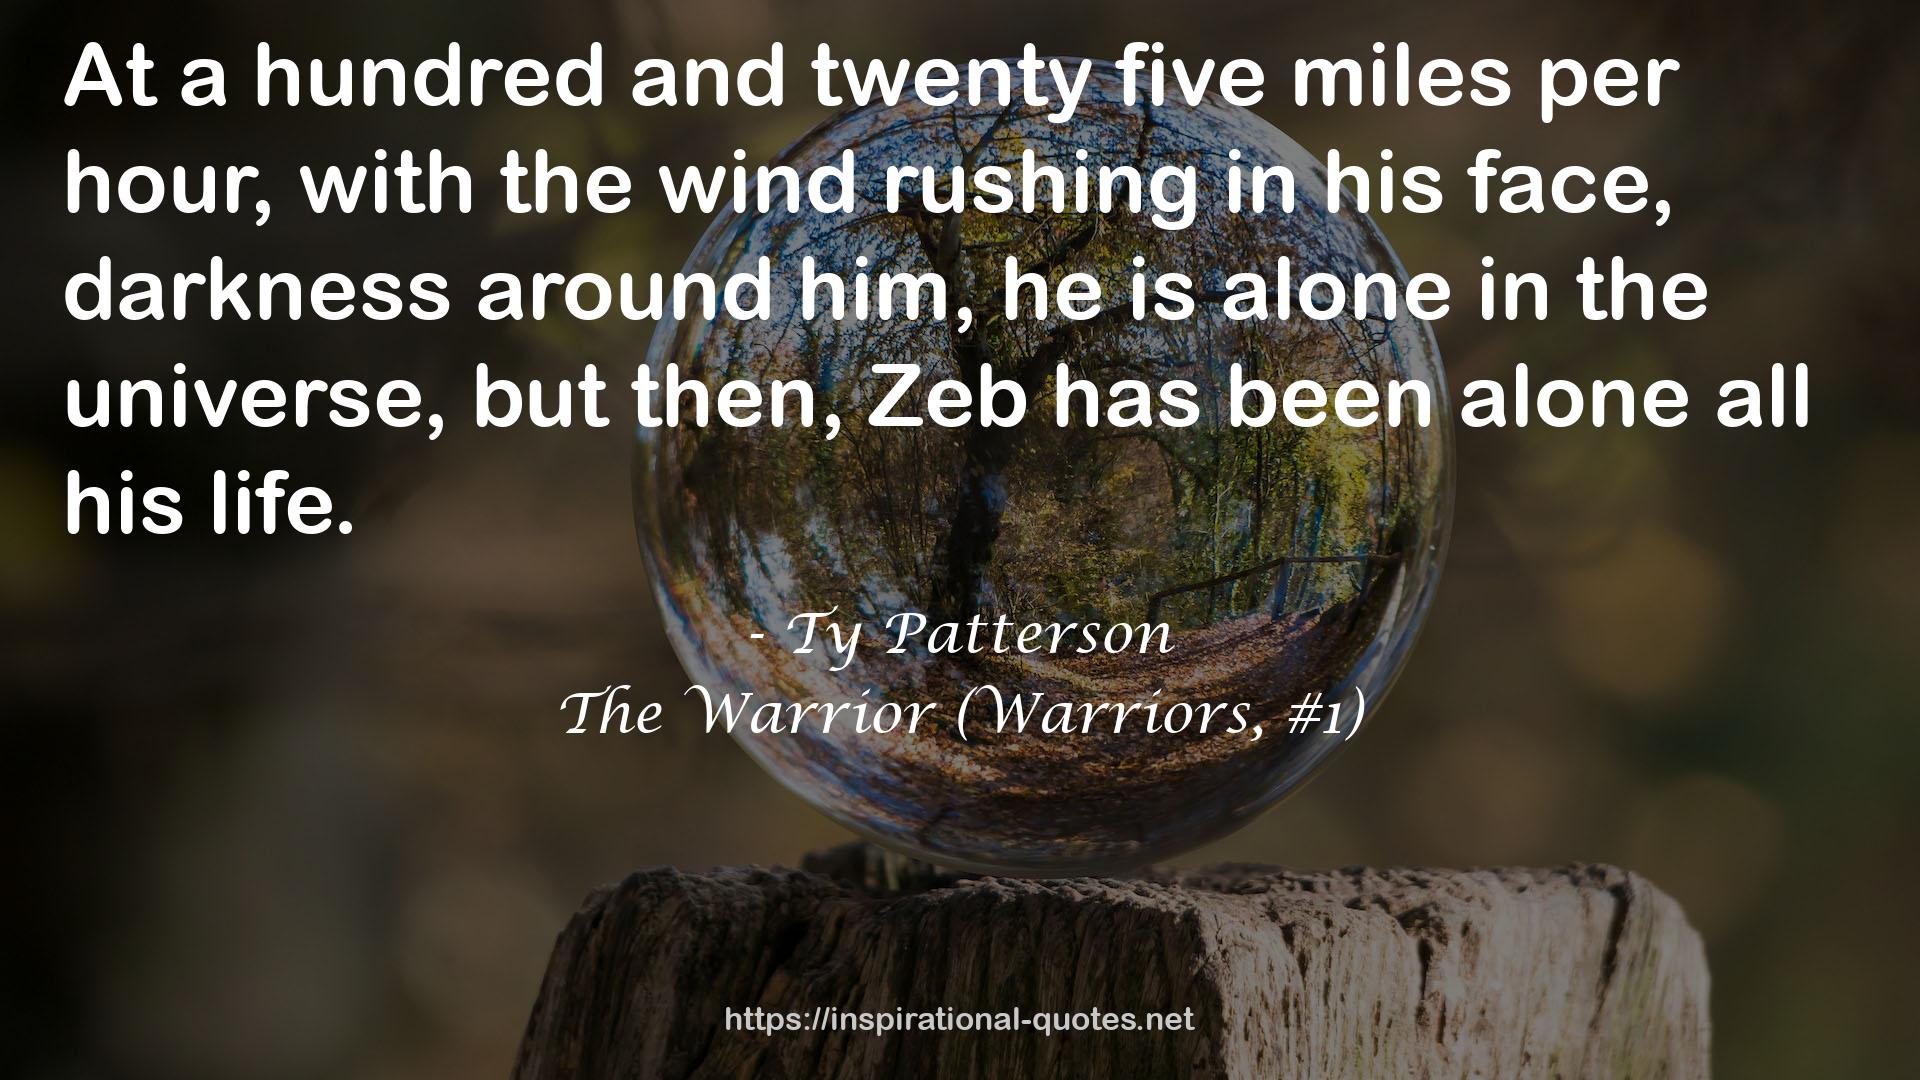 The Warrior (Warriors, #1) QUOTES